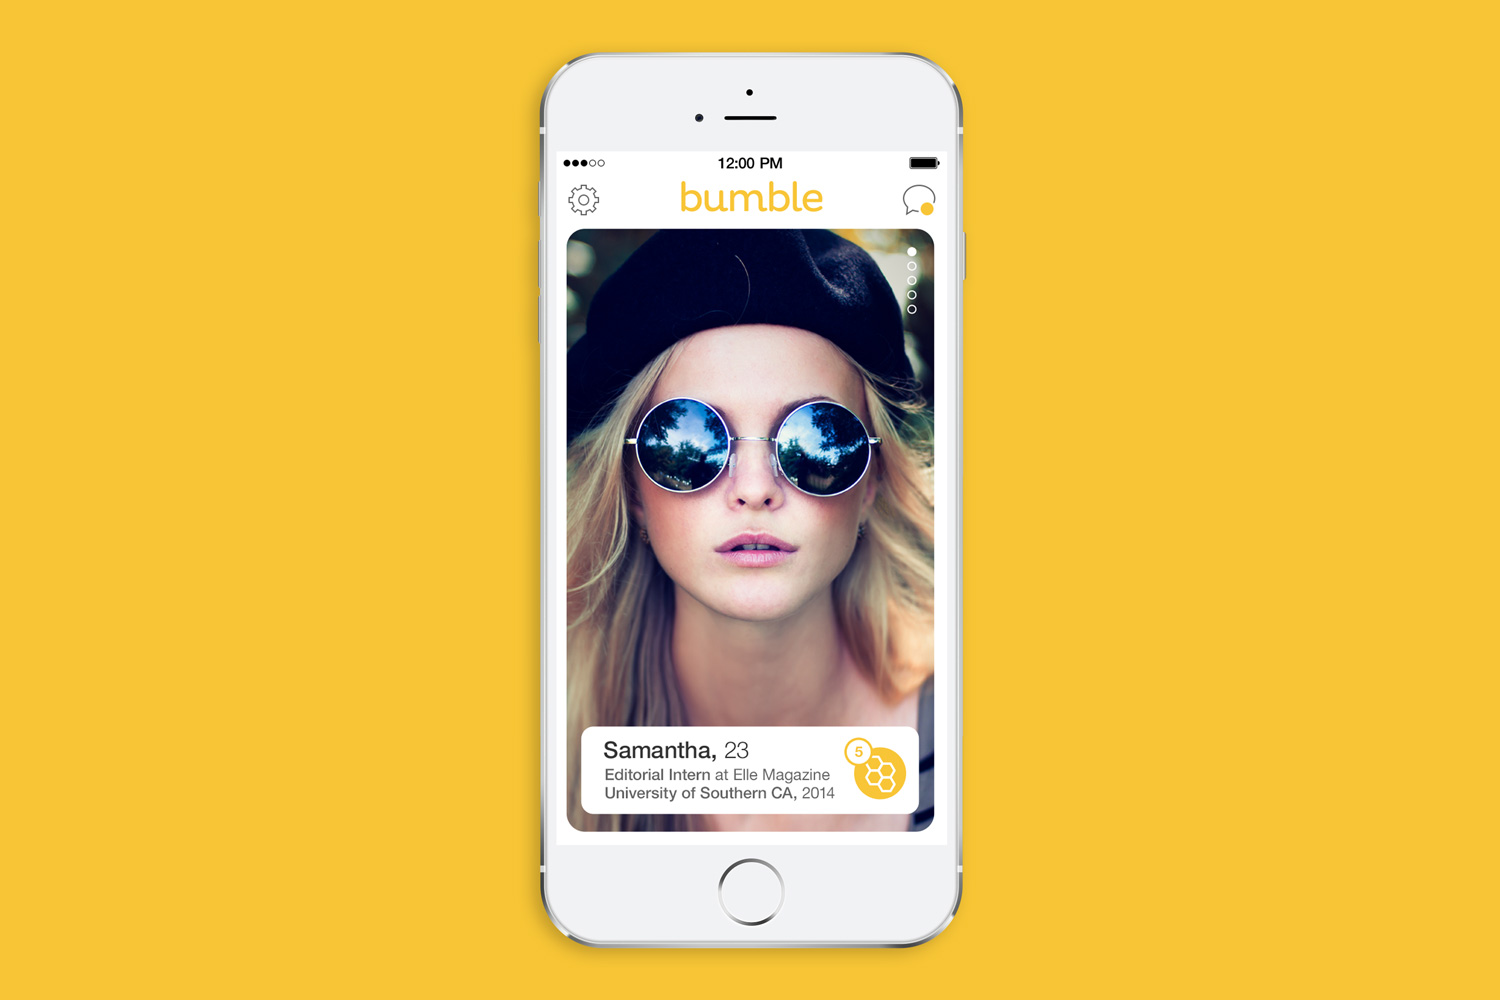 bumble bff mode dating app 5